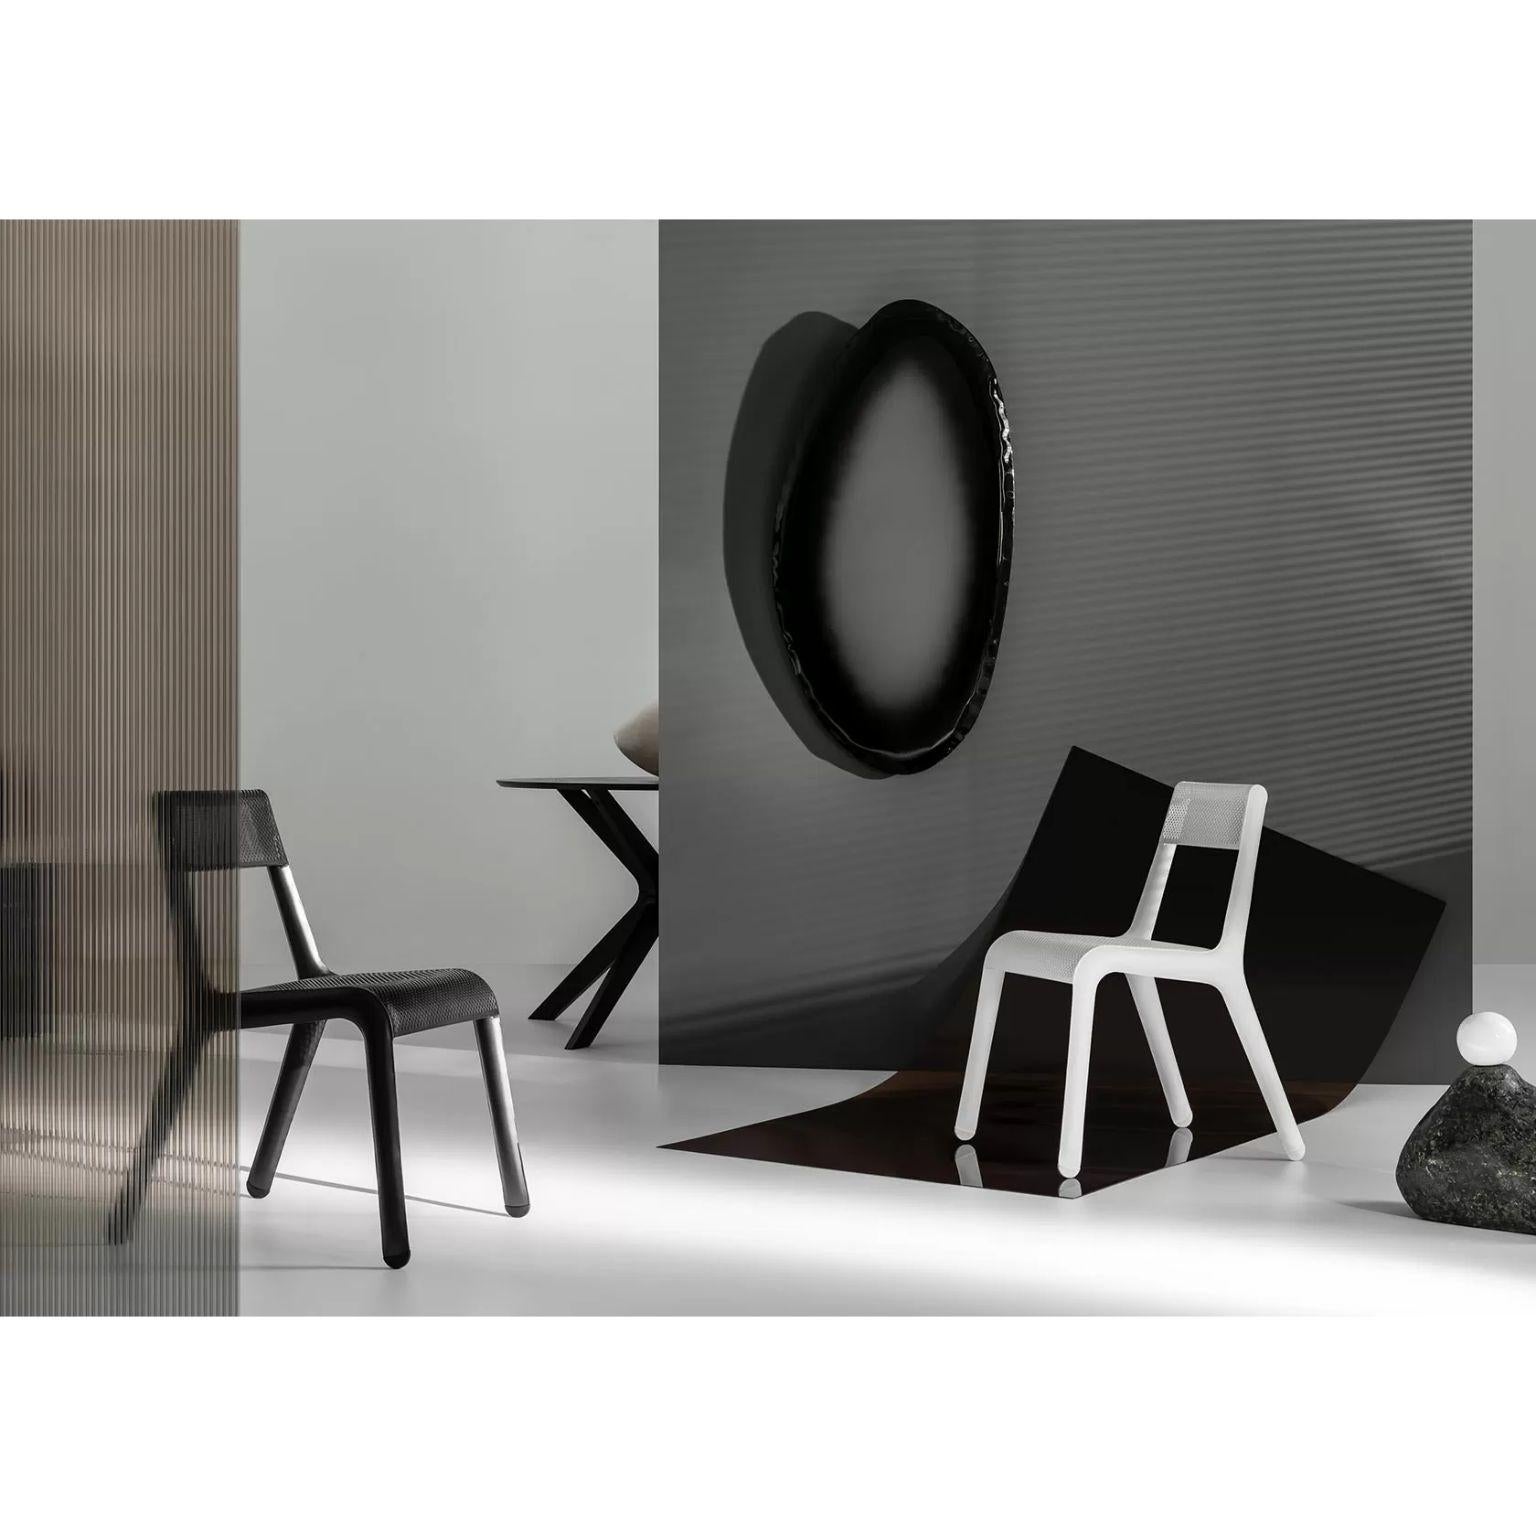 Dark Matter Tafla O2 Wall Mirror by Zieta In New Condition For Sale In Geneve, CH